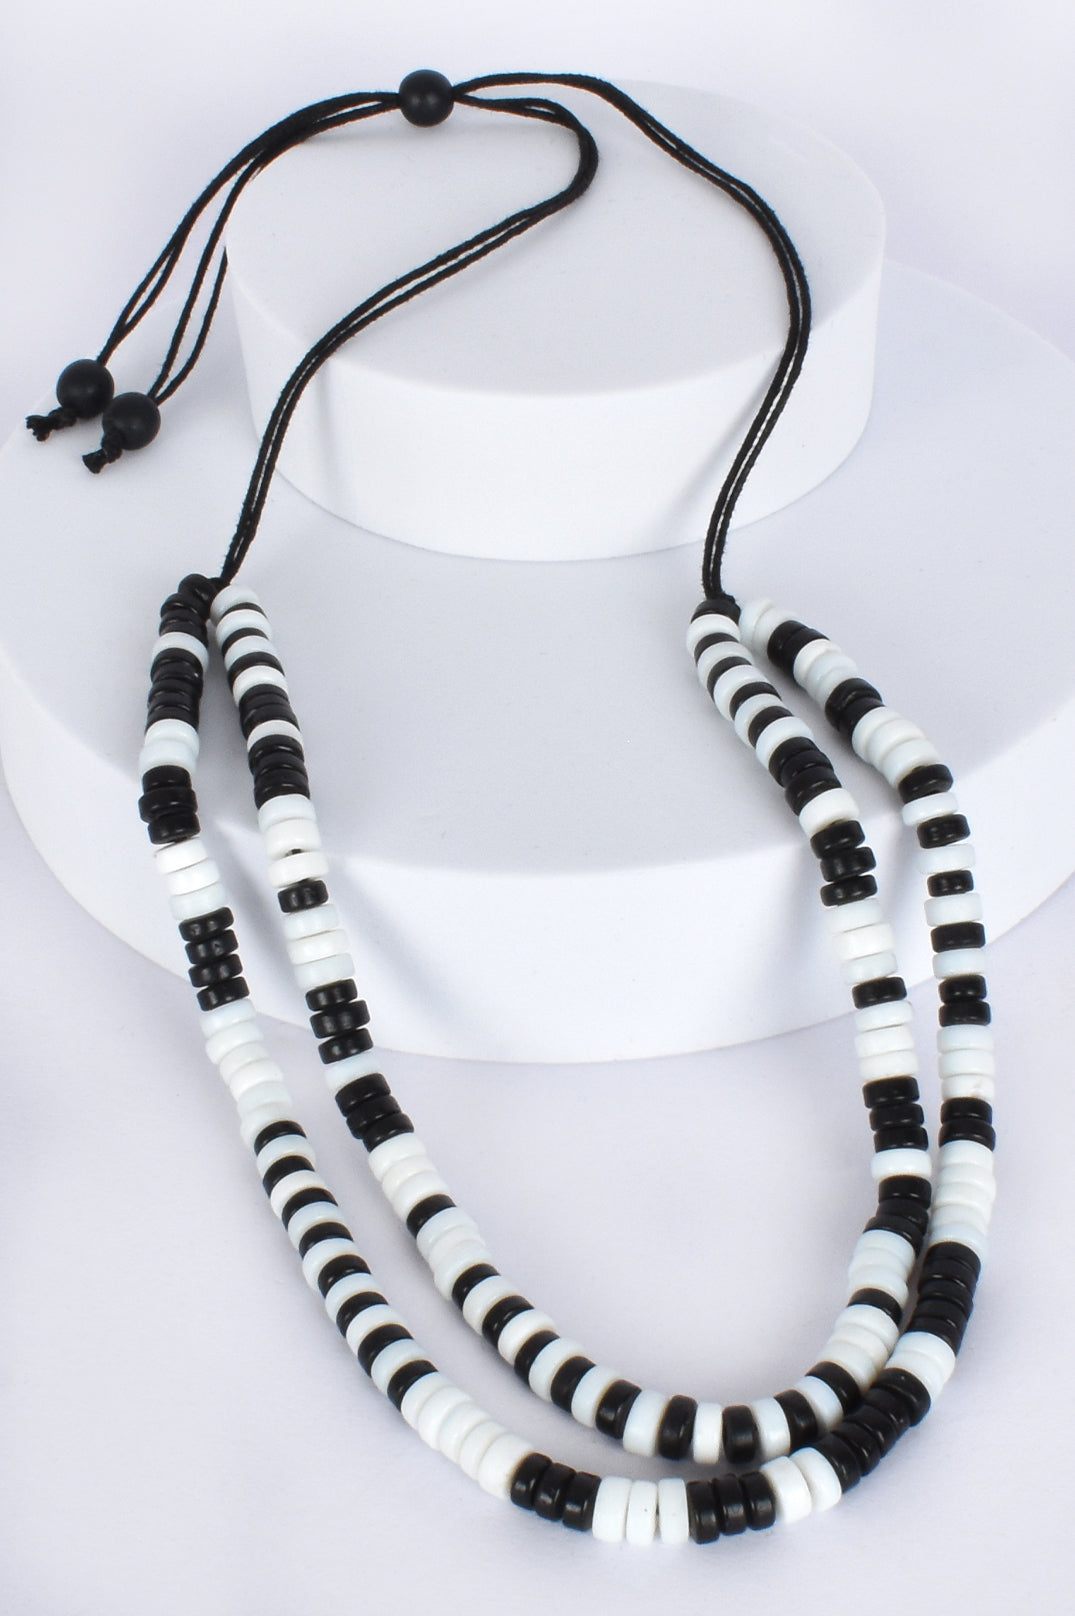 Tallulah Black and White Layered Adjustable Necklace.